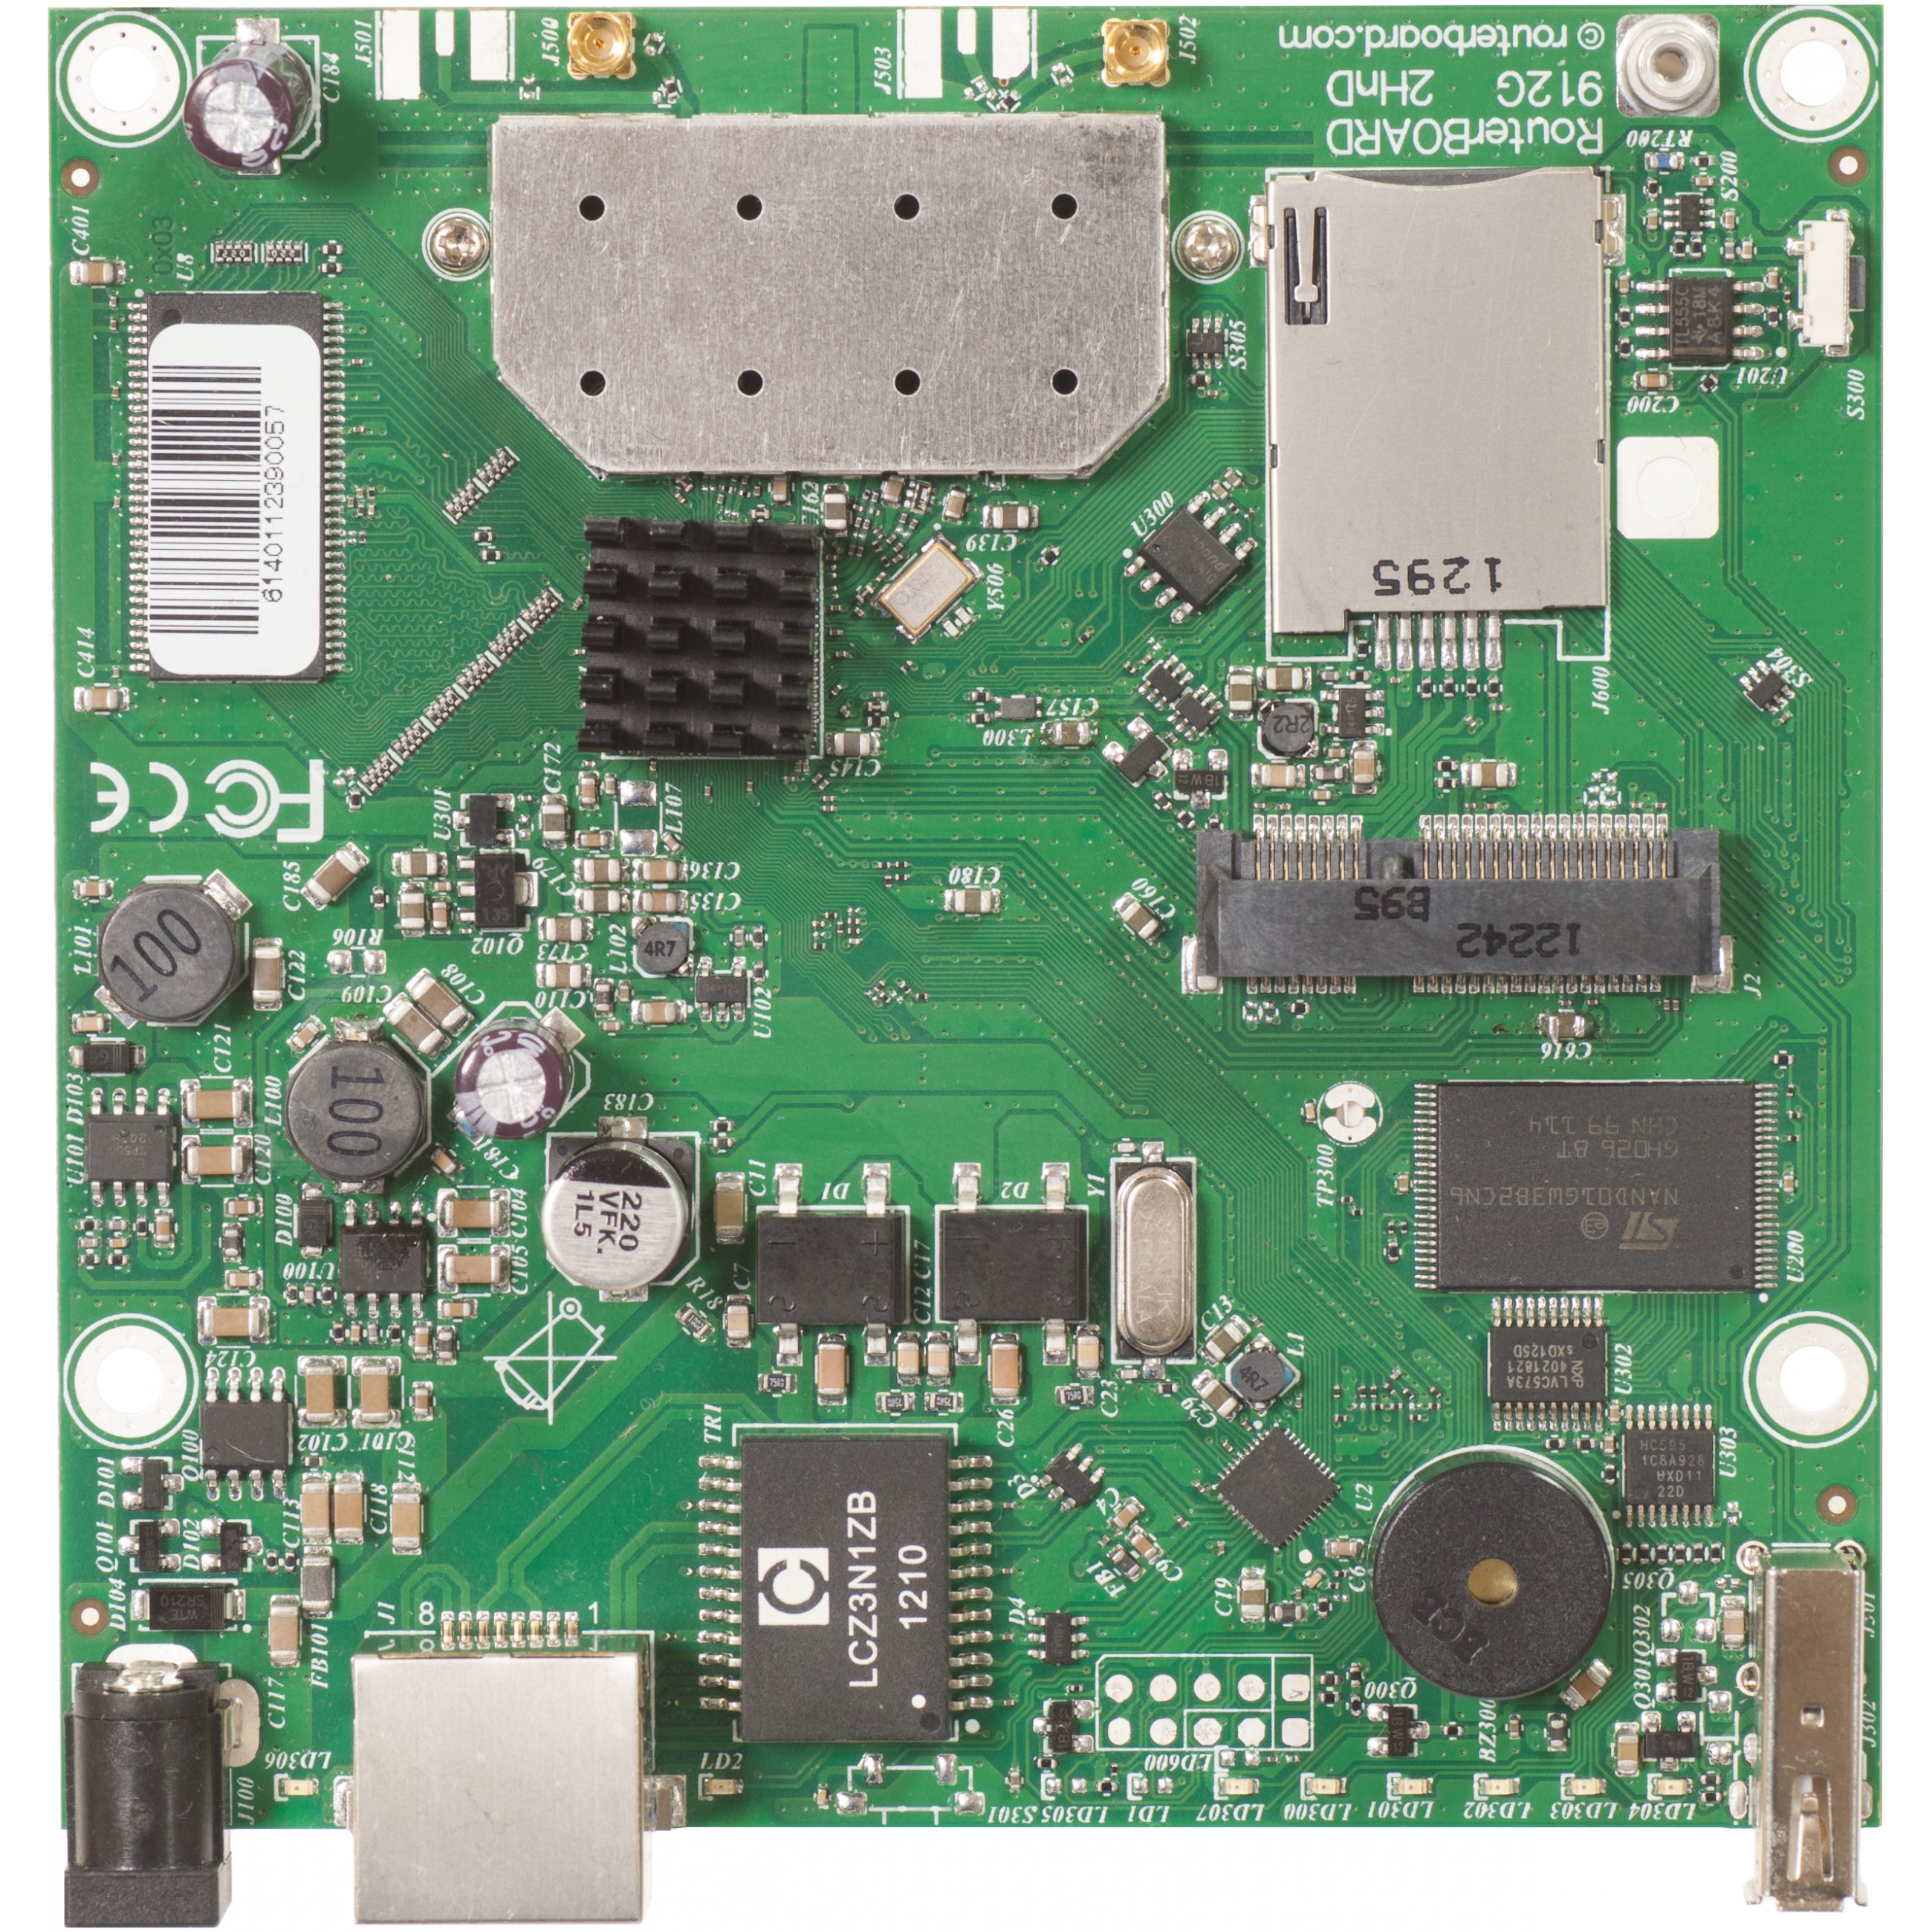 MIKROTIK RouterBOARD 912UAG with 600Mhz Atheros CP